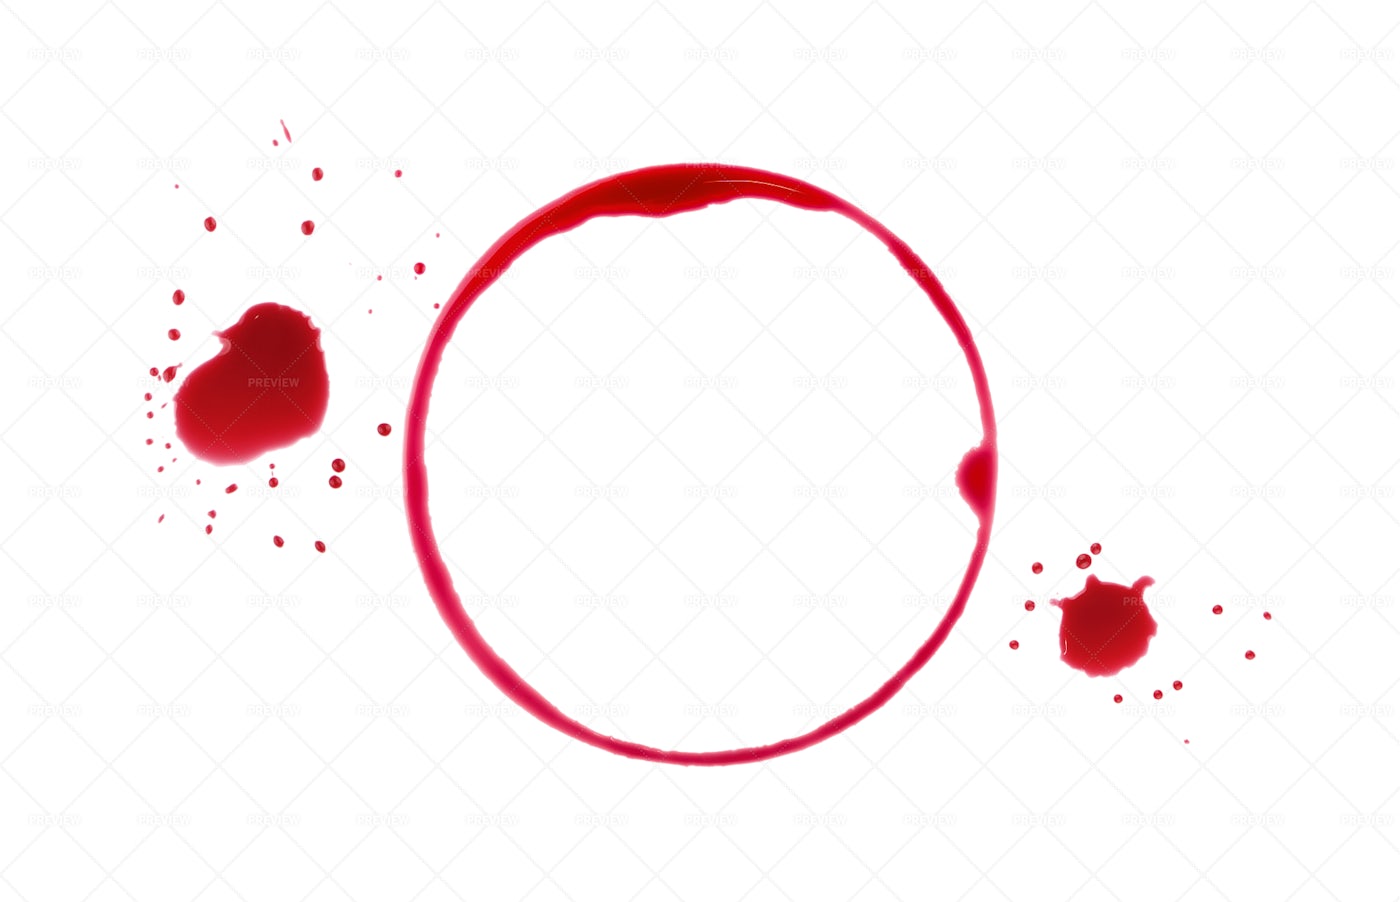 Red Wine Ring Stain: Stock Photos